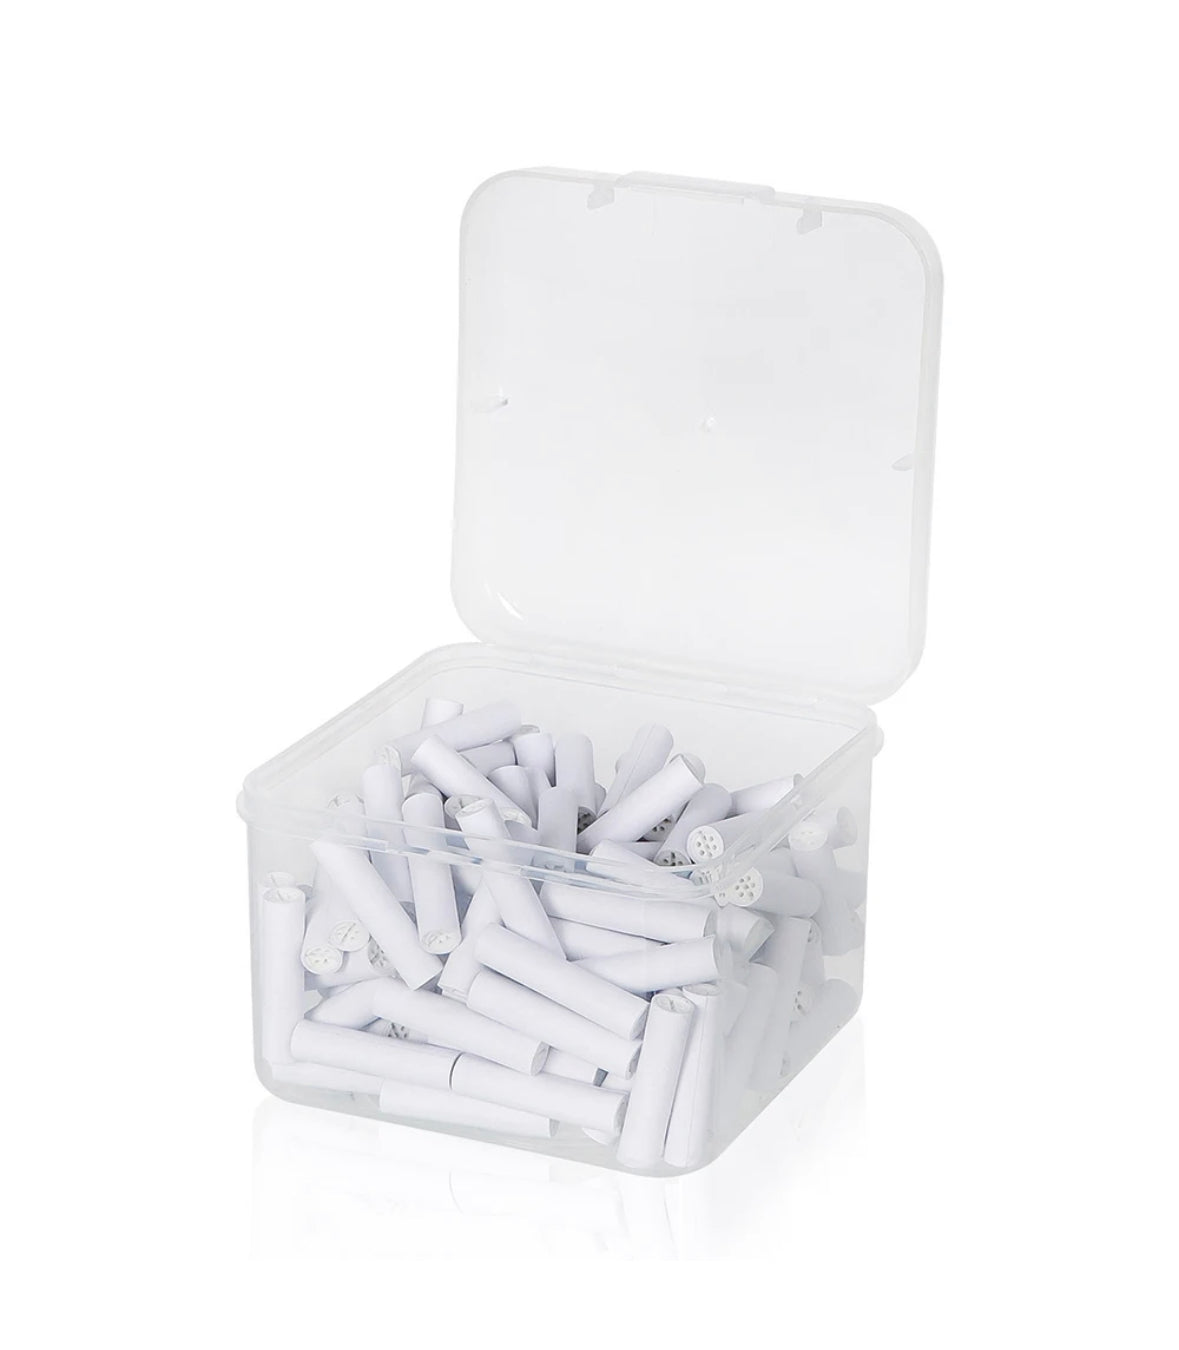 Activated Carbon filters 150 pieces box